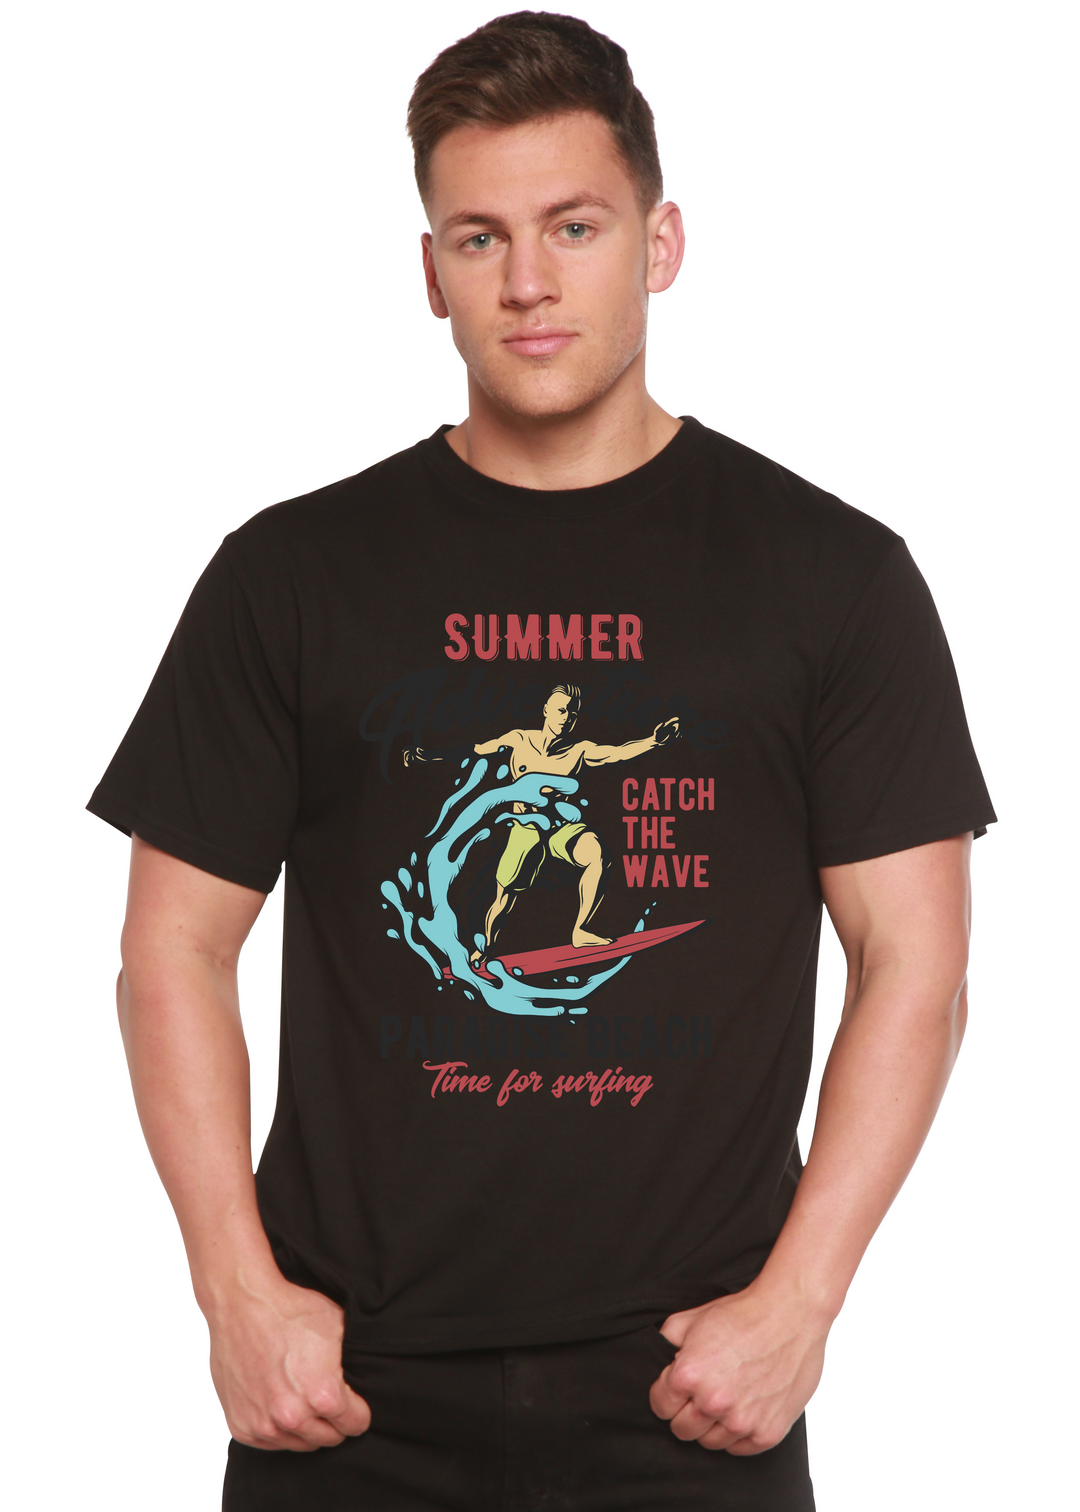 Catch The Wave men's bamboo tshirt black